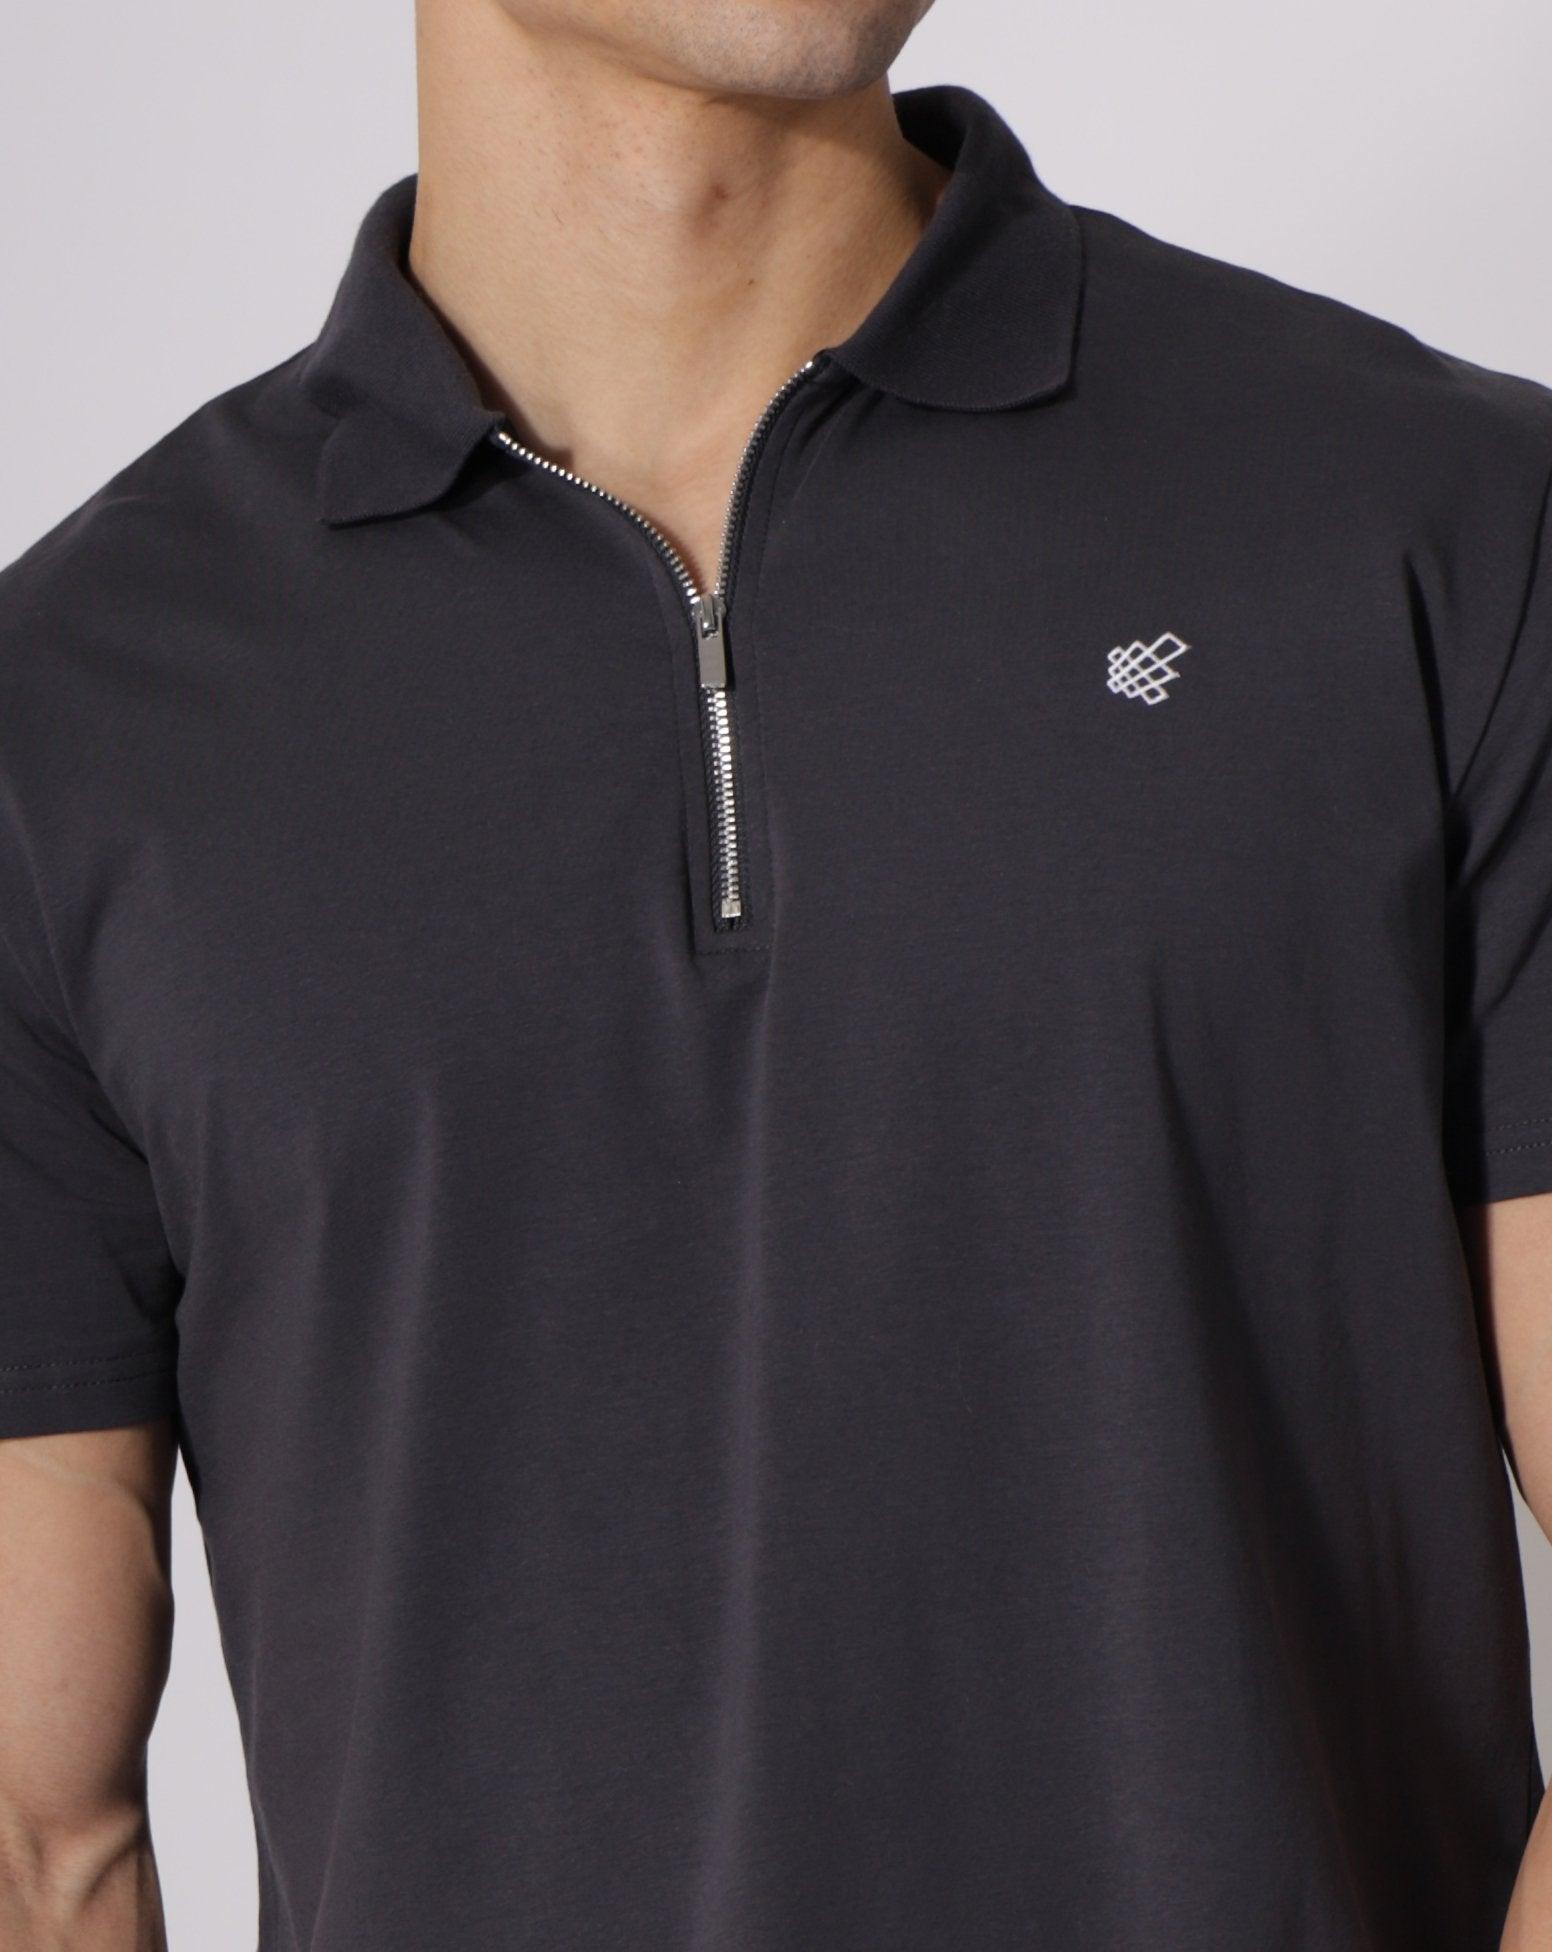 Men's Fitted Zipper Polo Shirt - Dark Gray T-Shirts Jed North 